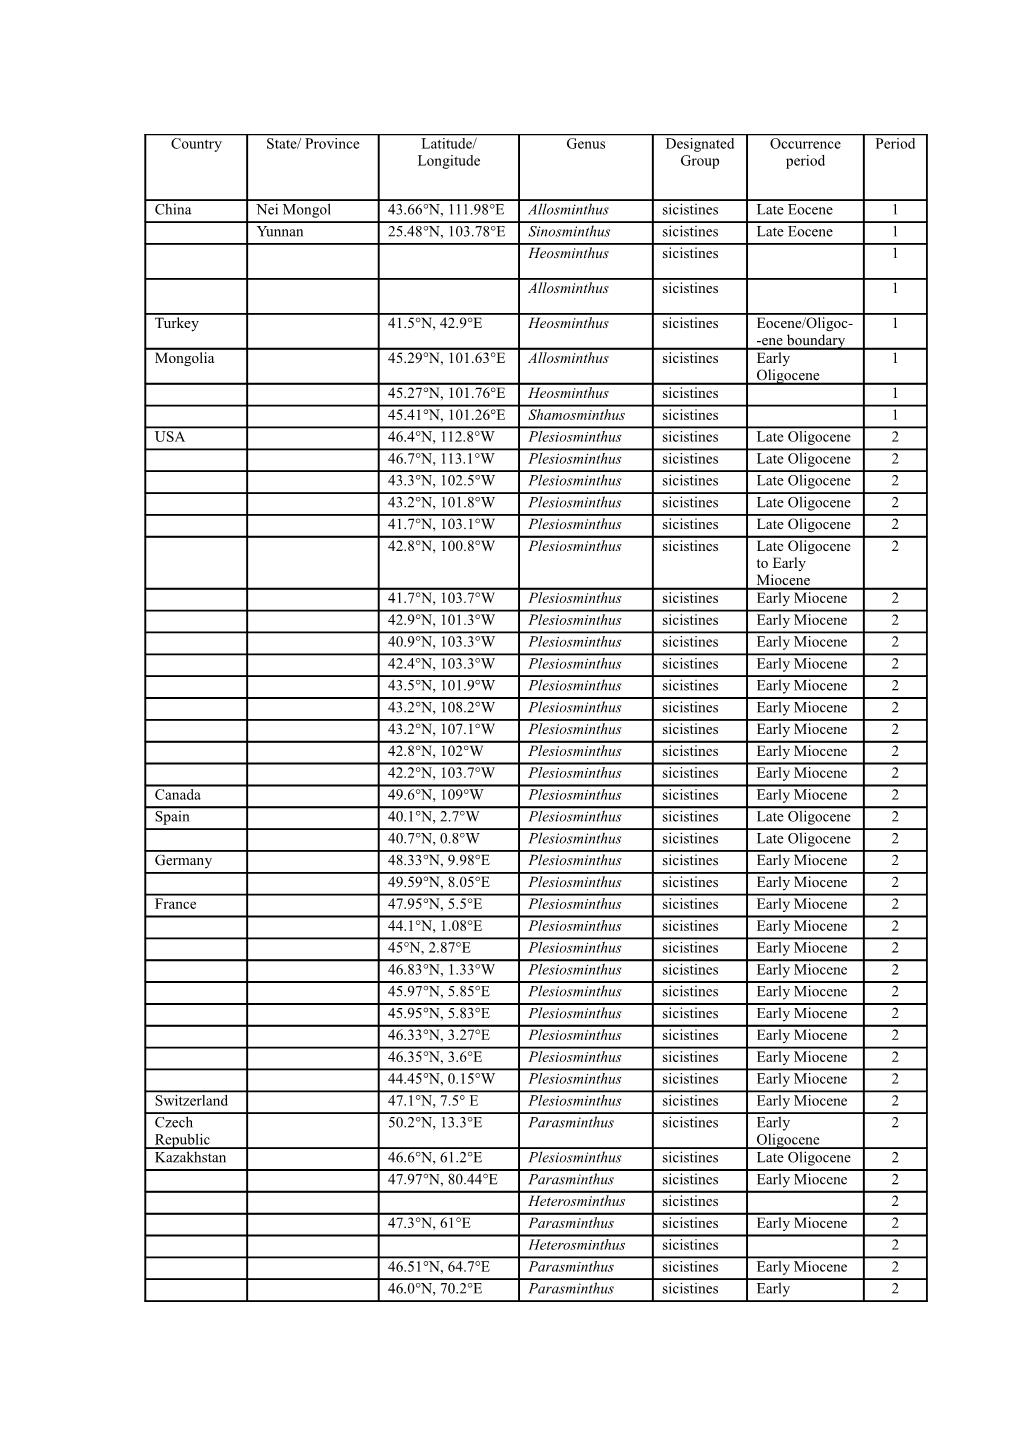 Appendix Table 1 List of Fossil Records of Dipodoidea